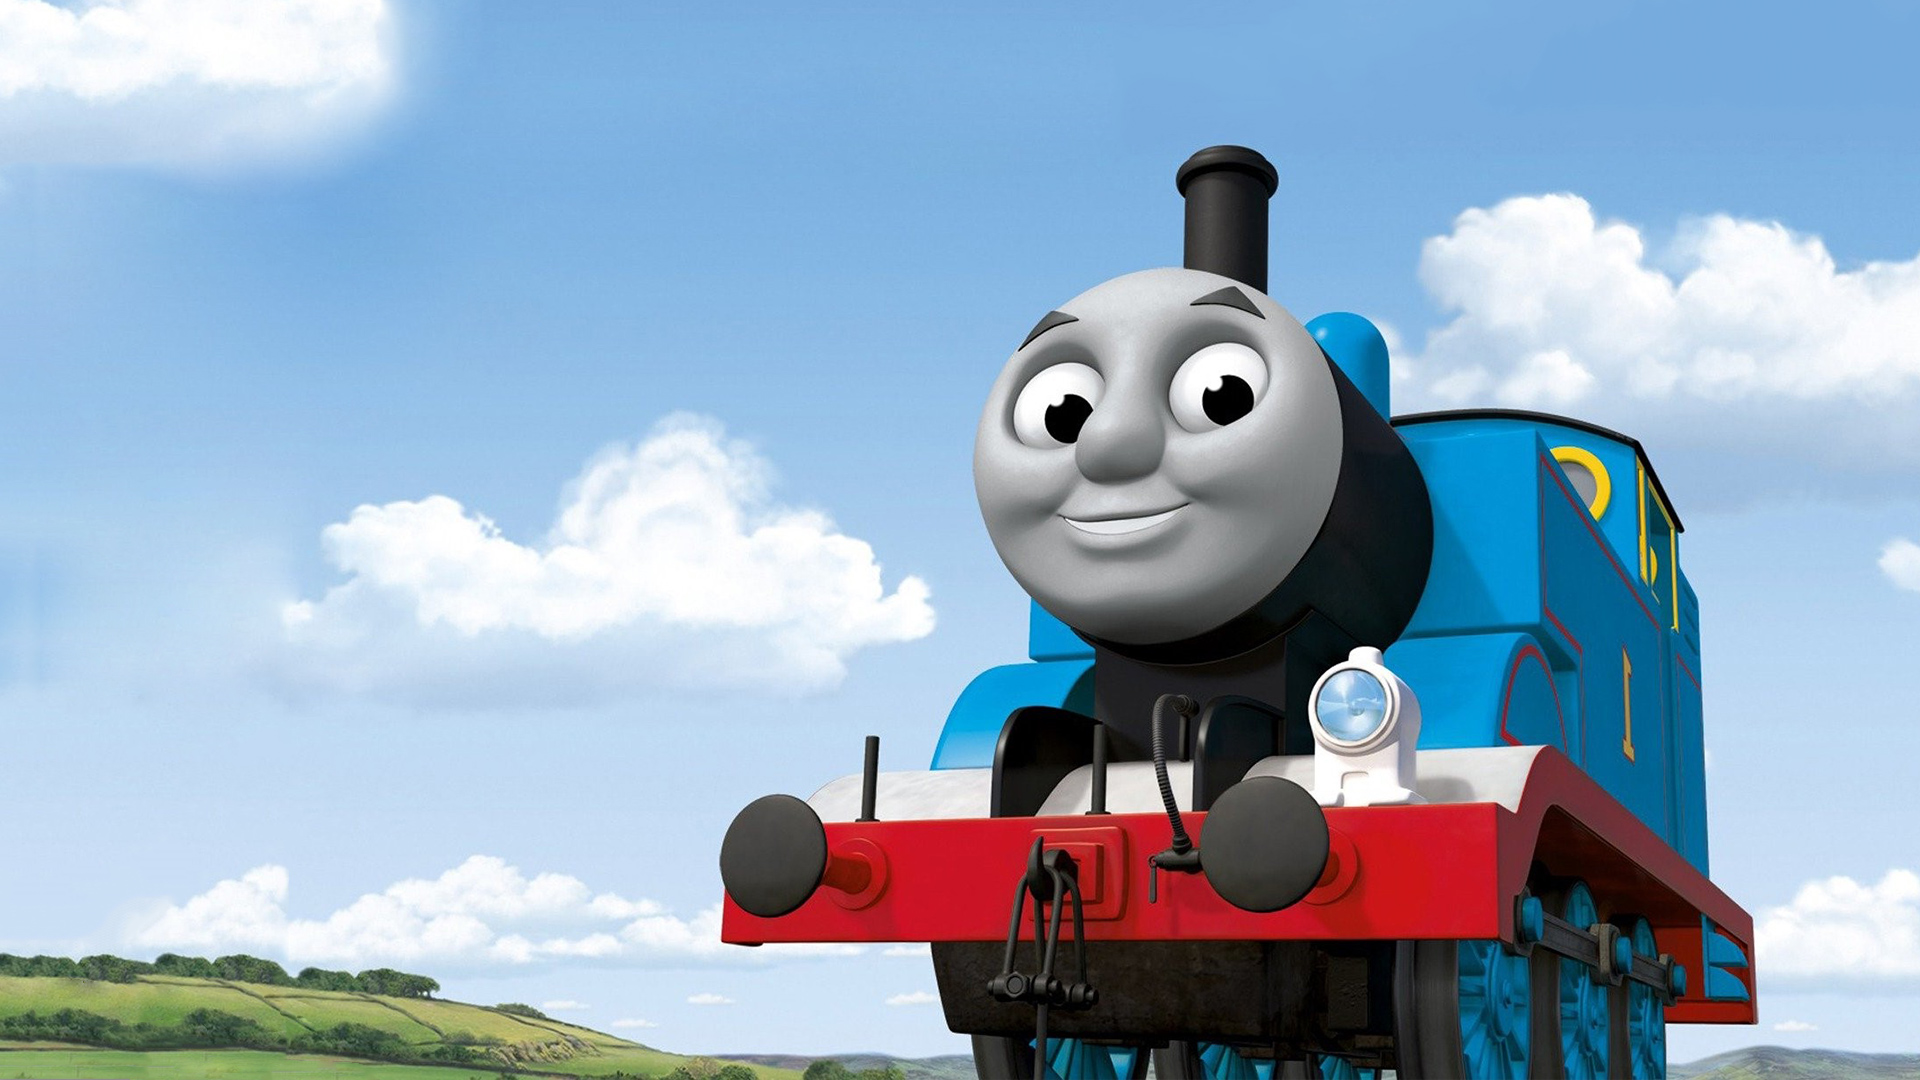 watch thomas and friends online free